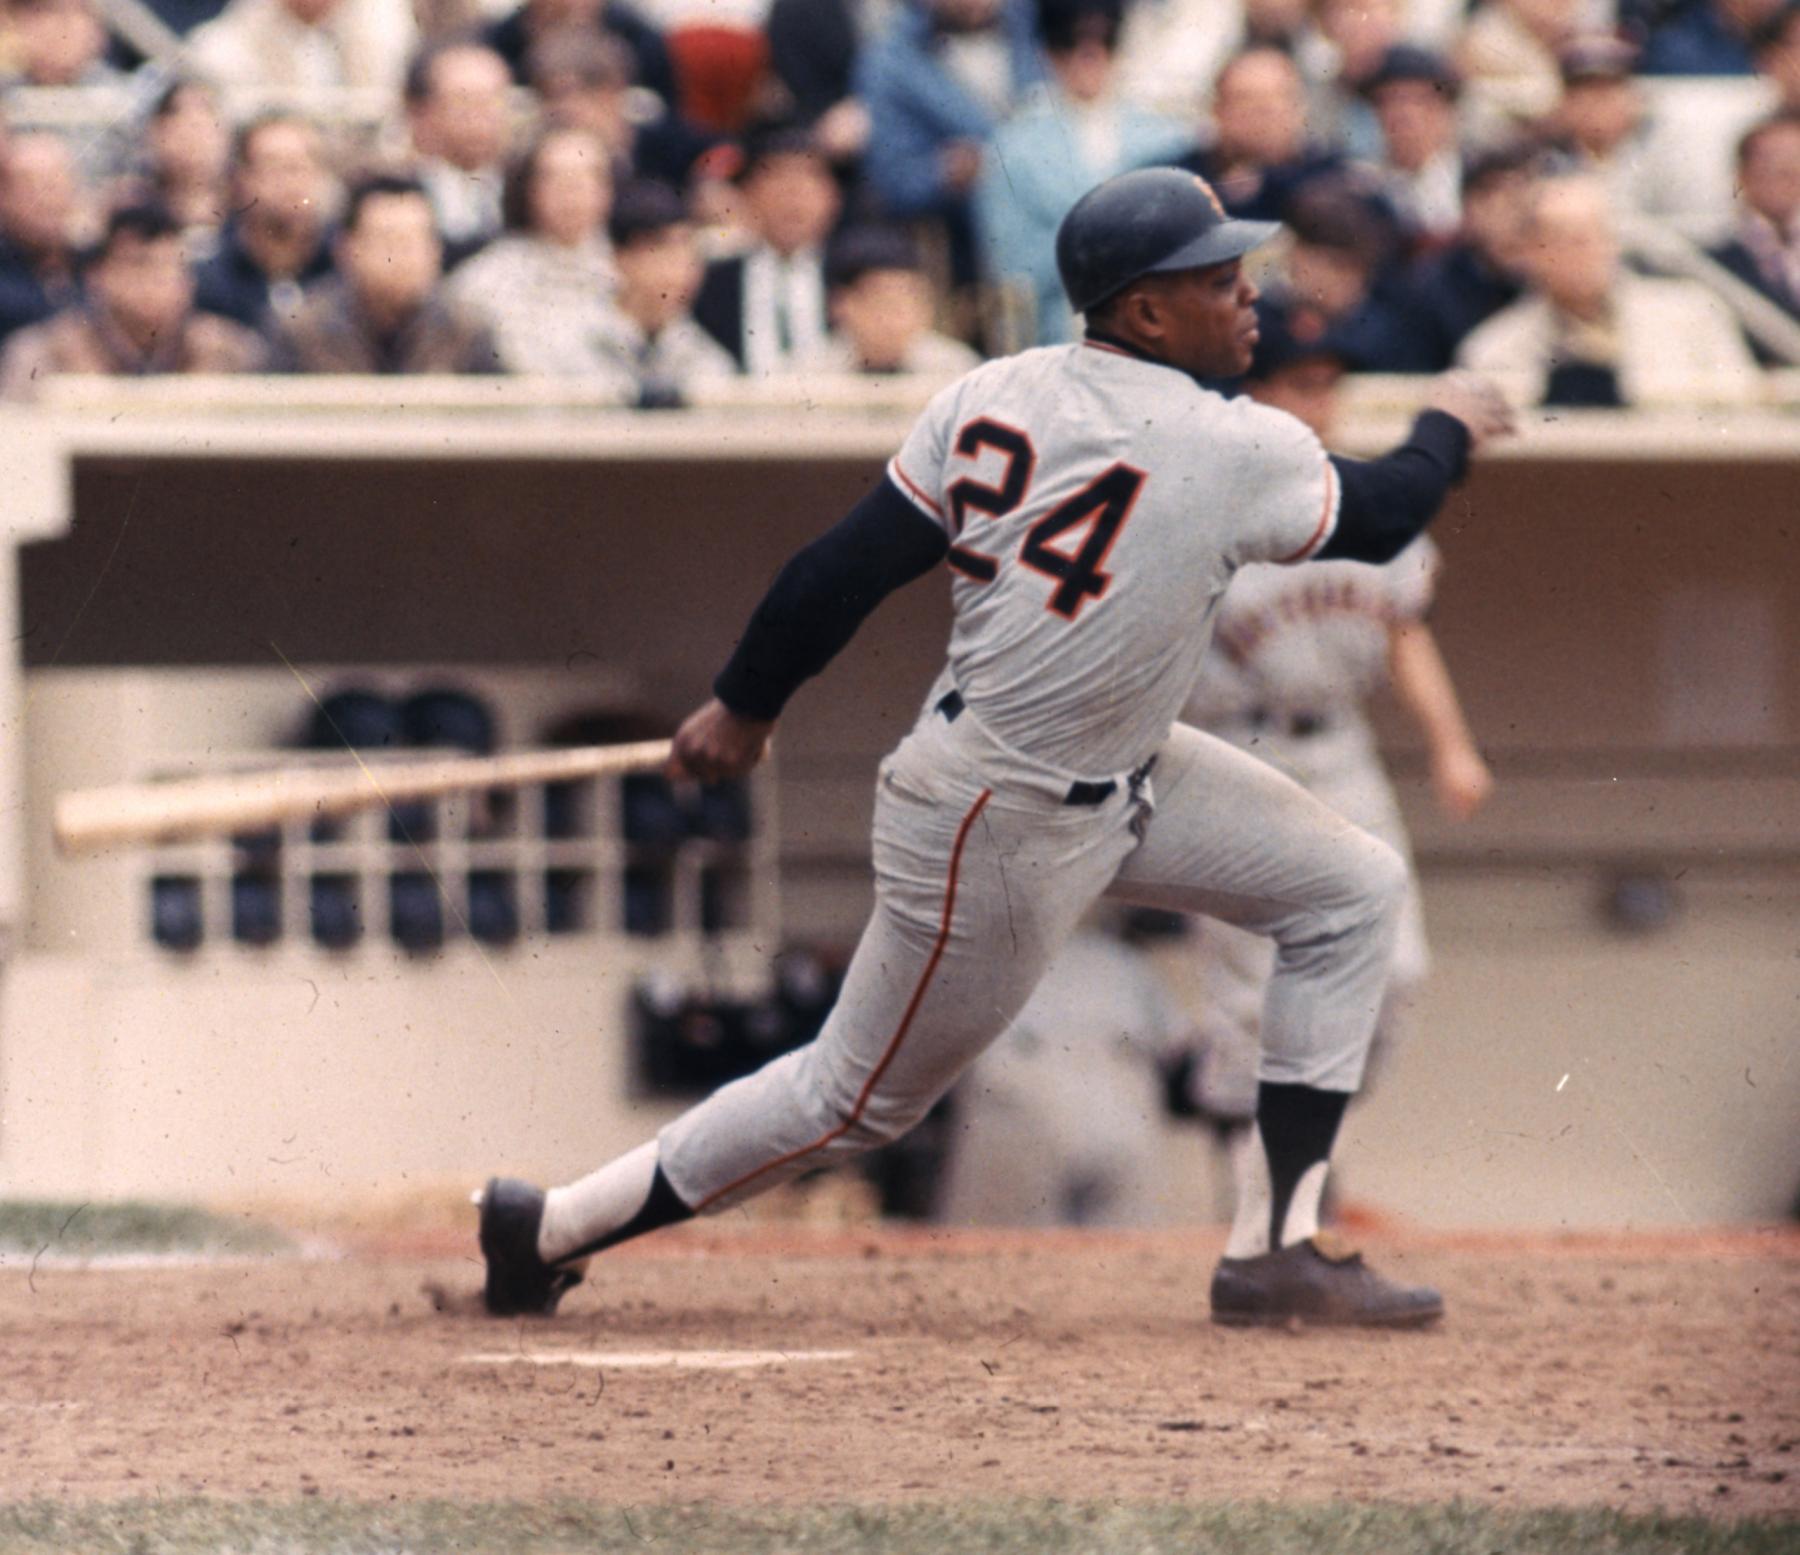 Throwback Thursday: Willie Mays Gets His 3,000th Career Hit